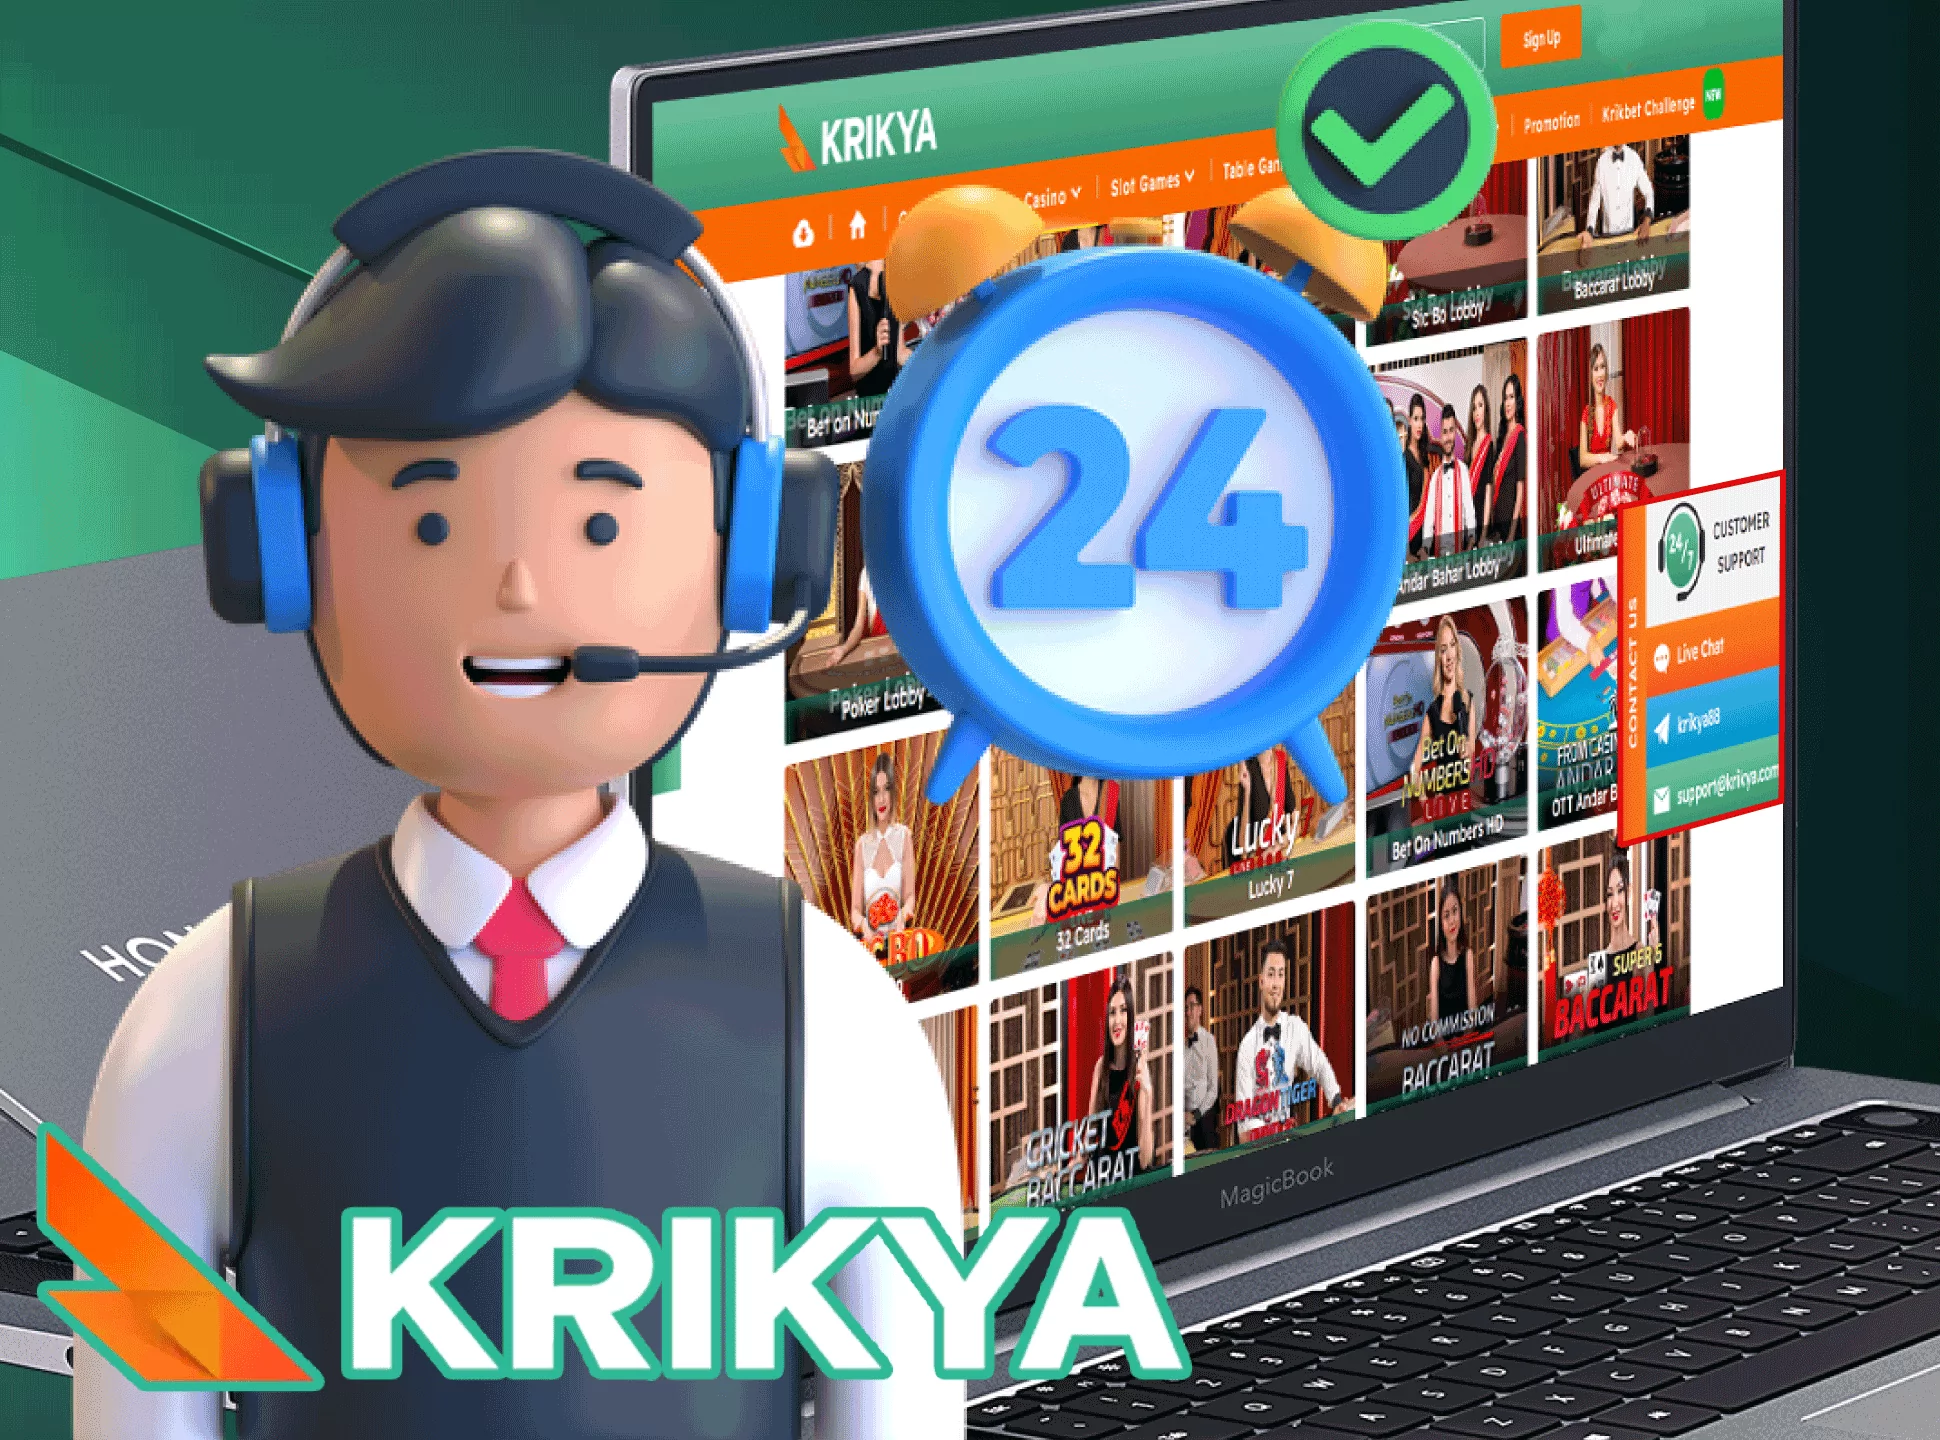 Here is a list of the Krikya team contacts.